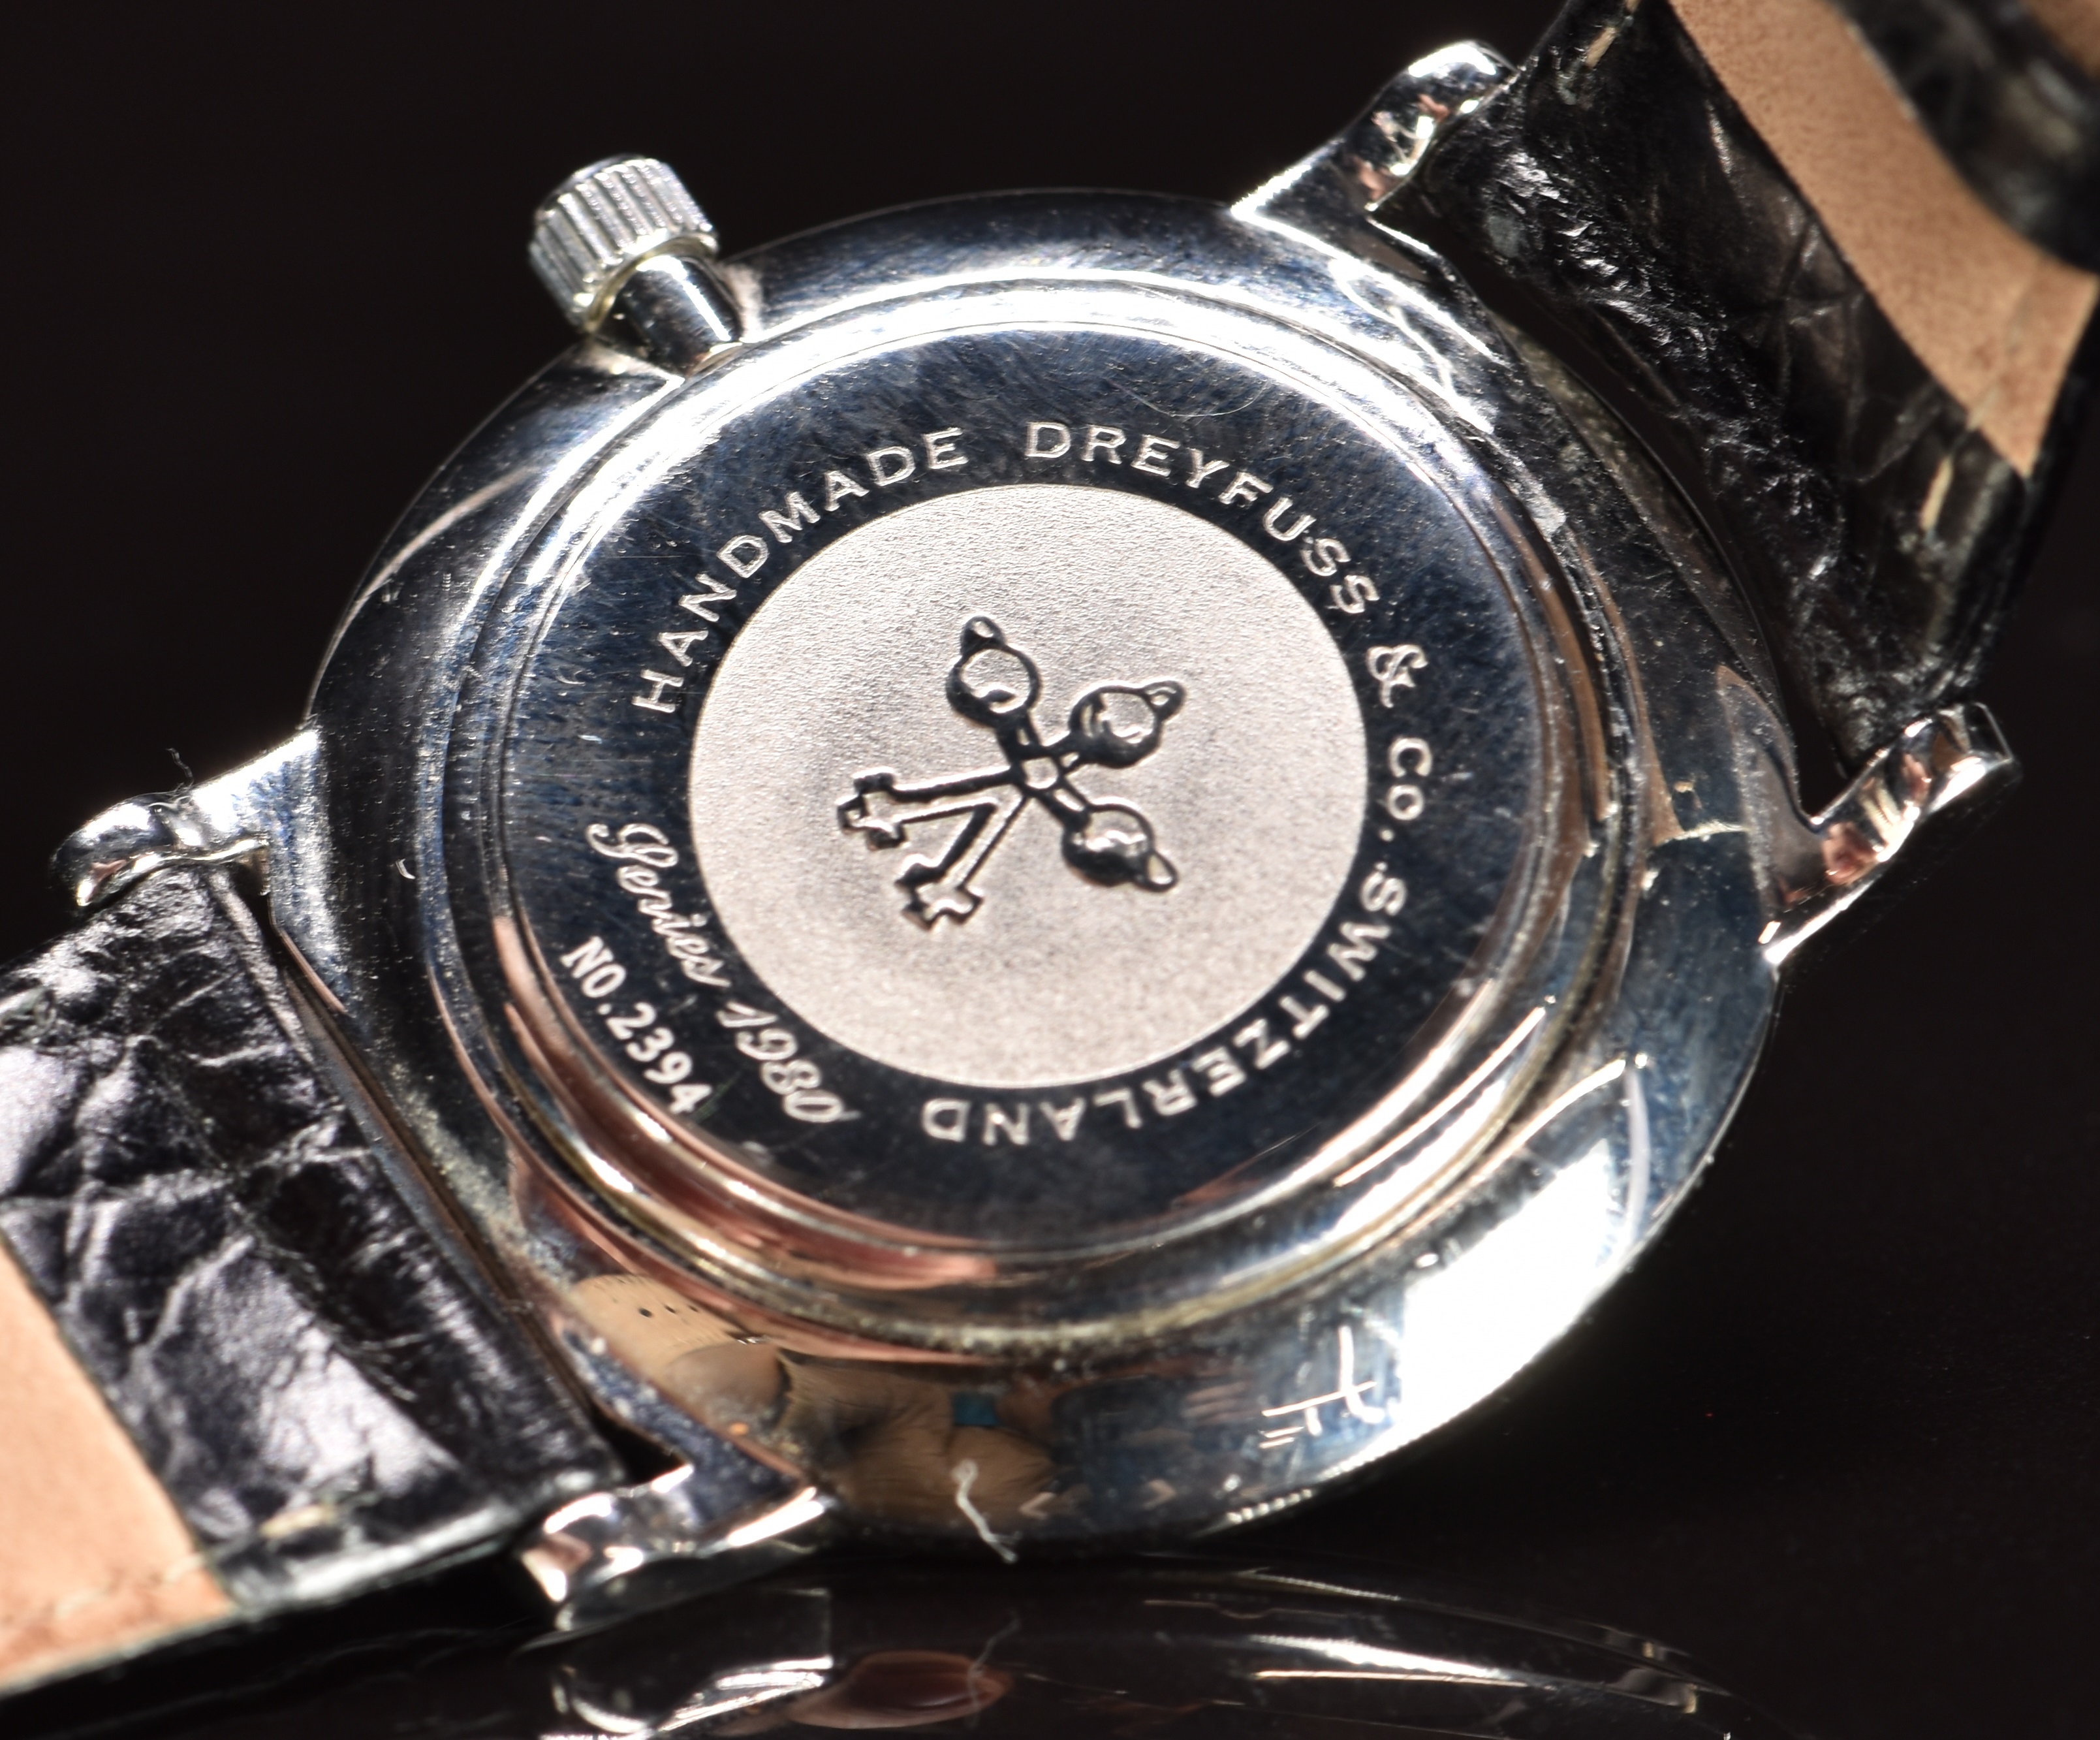 Dreyfuss & Co gentleman's wristwatch with blued hands, black Roman numerals, white dial, stainless - Image 6 of 6